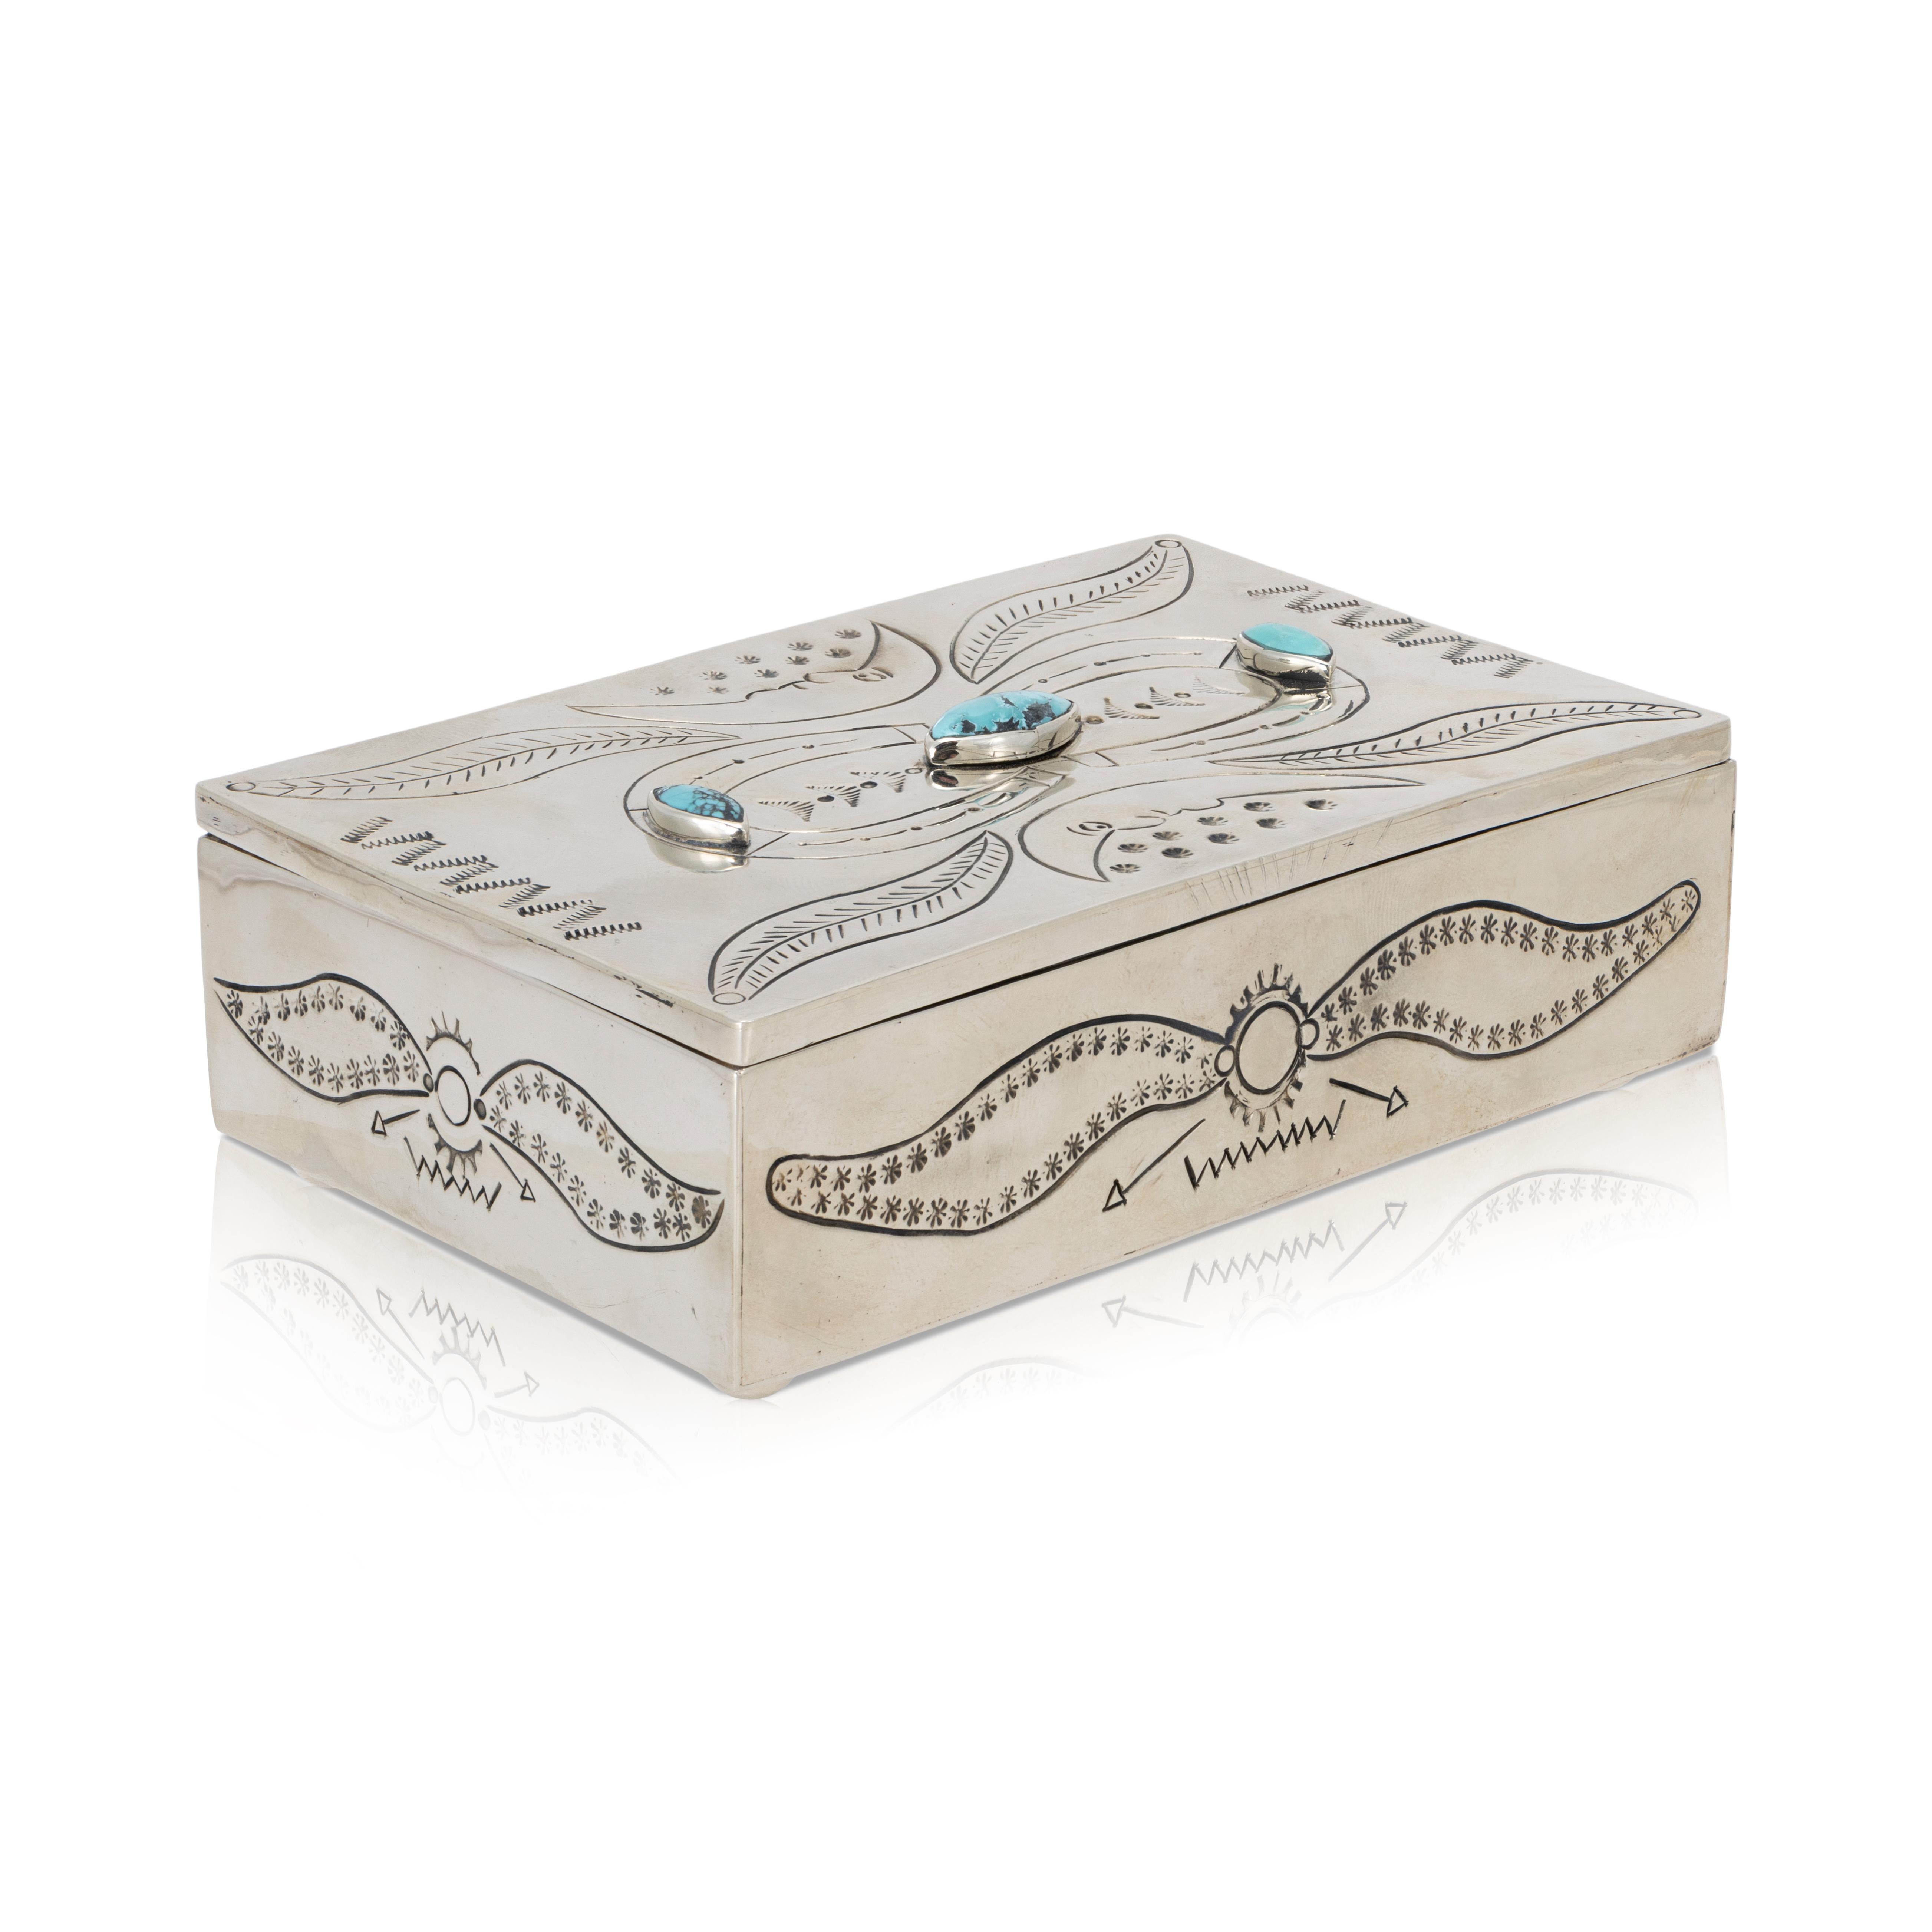 Armand American Horse nickel silver and turquoise jewelry box. Includes moon face motif on lid and hand stamped detail along sides. Stamped on bottom with artist hallmark. Three genuine, natural turquoise stones on lid. 

PERIOD: Late 20th